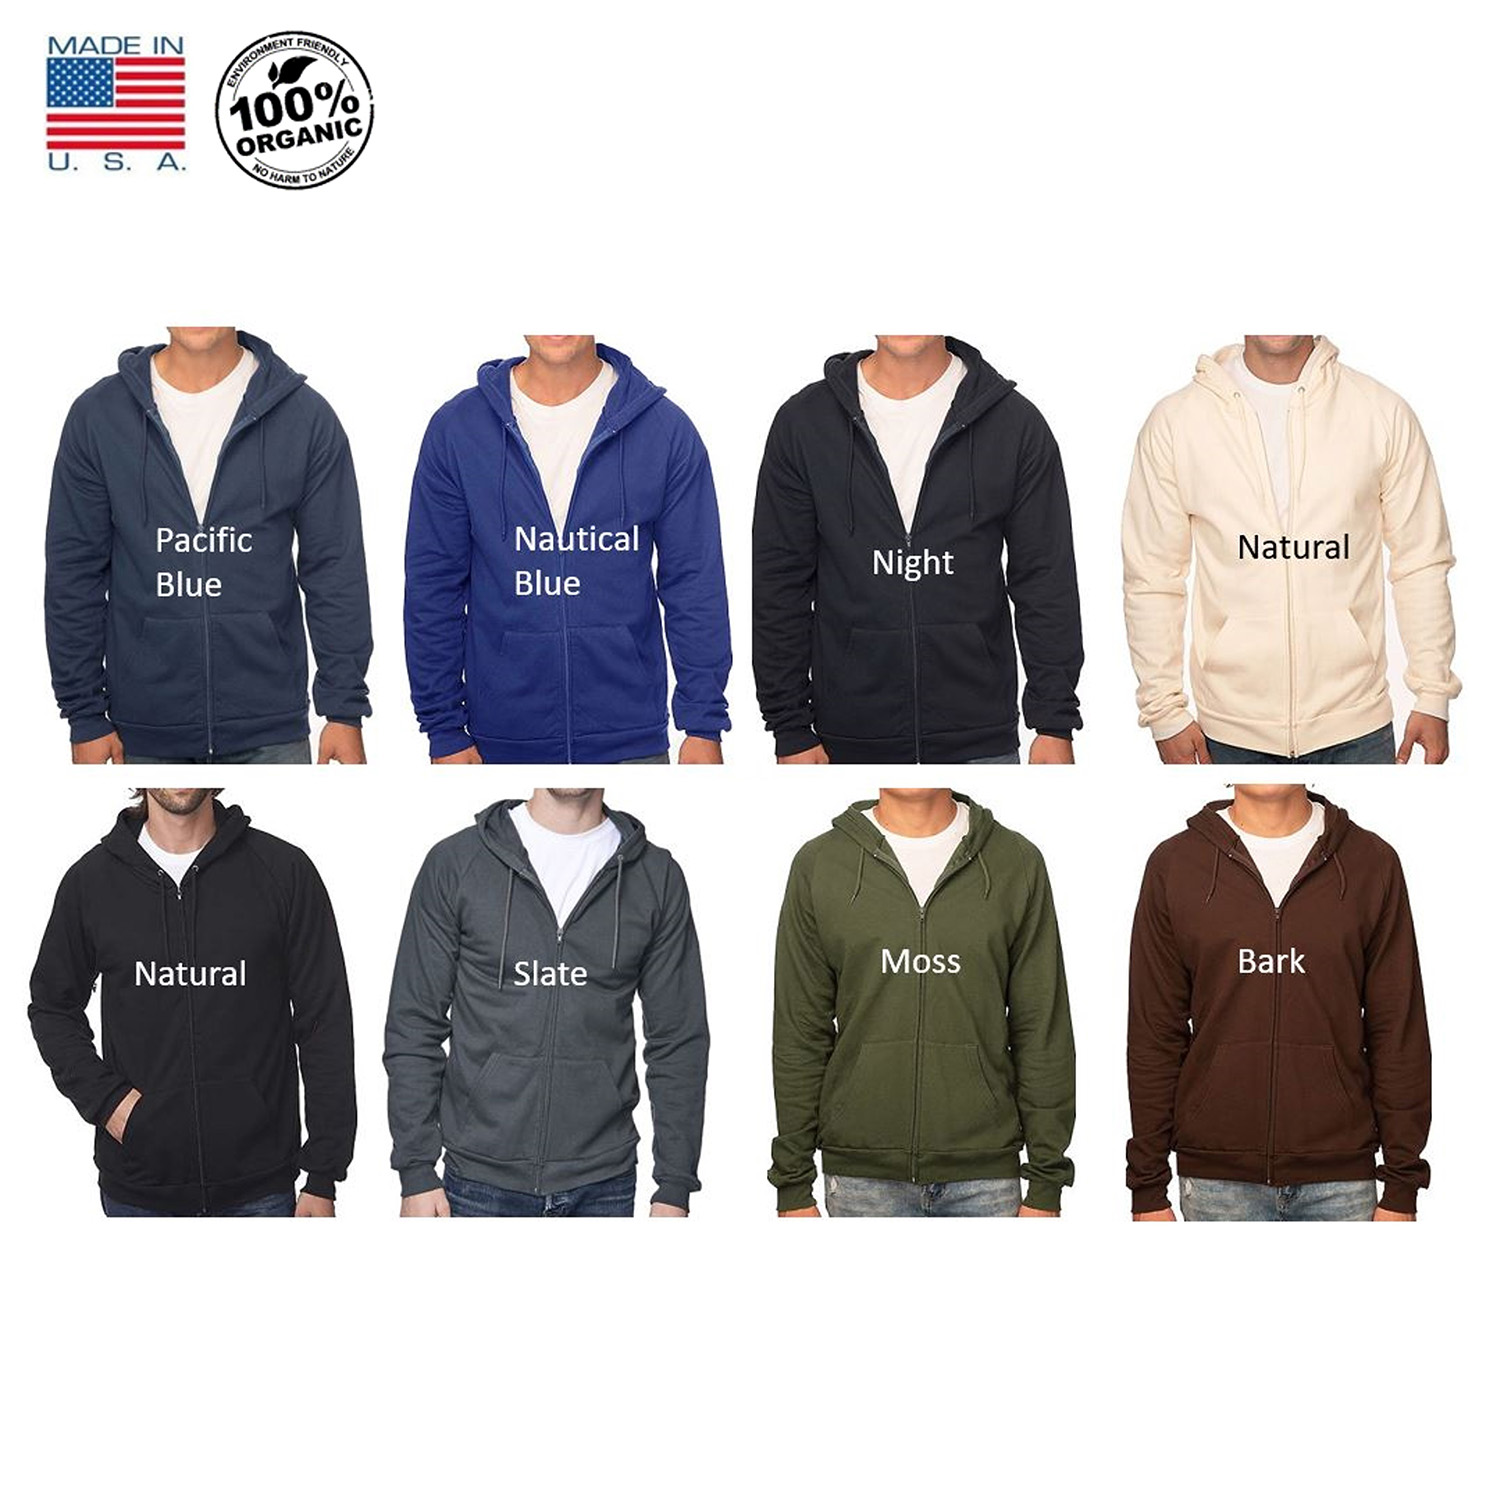 USA made organic cotton full zip hoodie colors imprinted